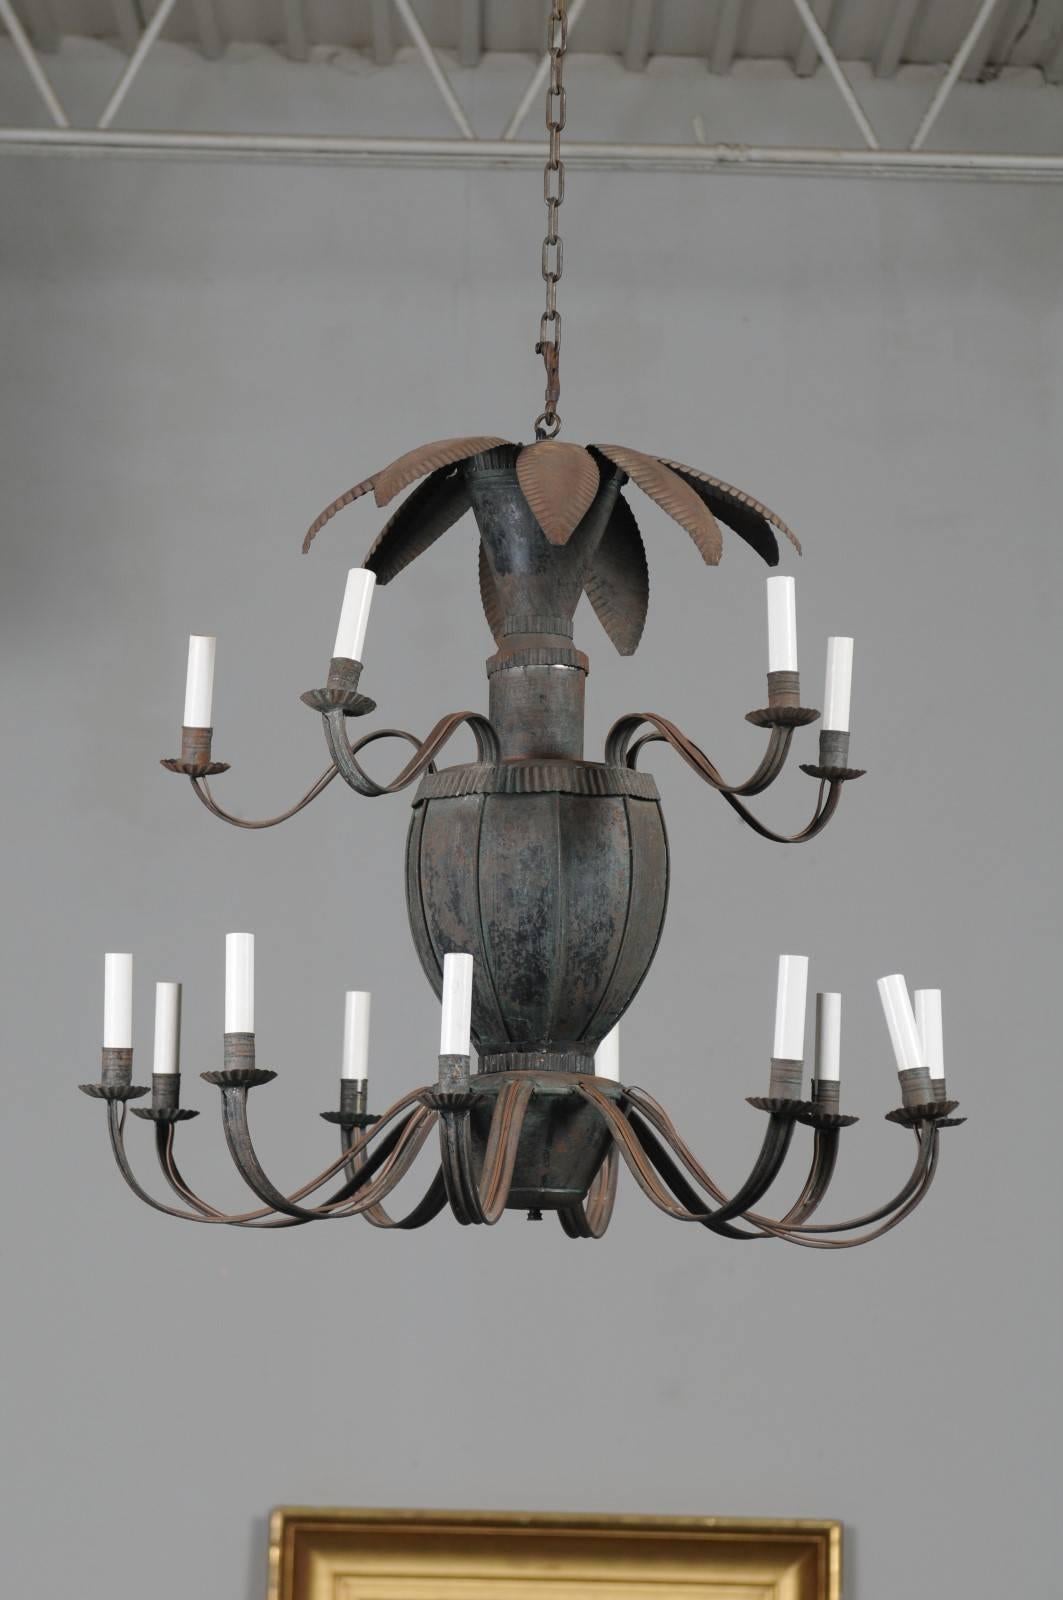 A French painted tole 14-light chandelier with central basket, scrolled arms and leaf motifs from the late 19th century. This French tole light fixture features a vertical silhouette made of a central metal basket, supporting 14 lights distributed